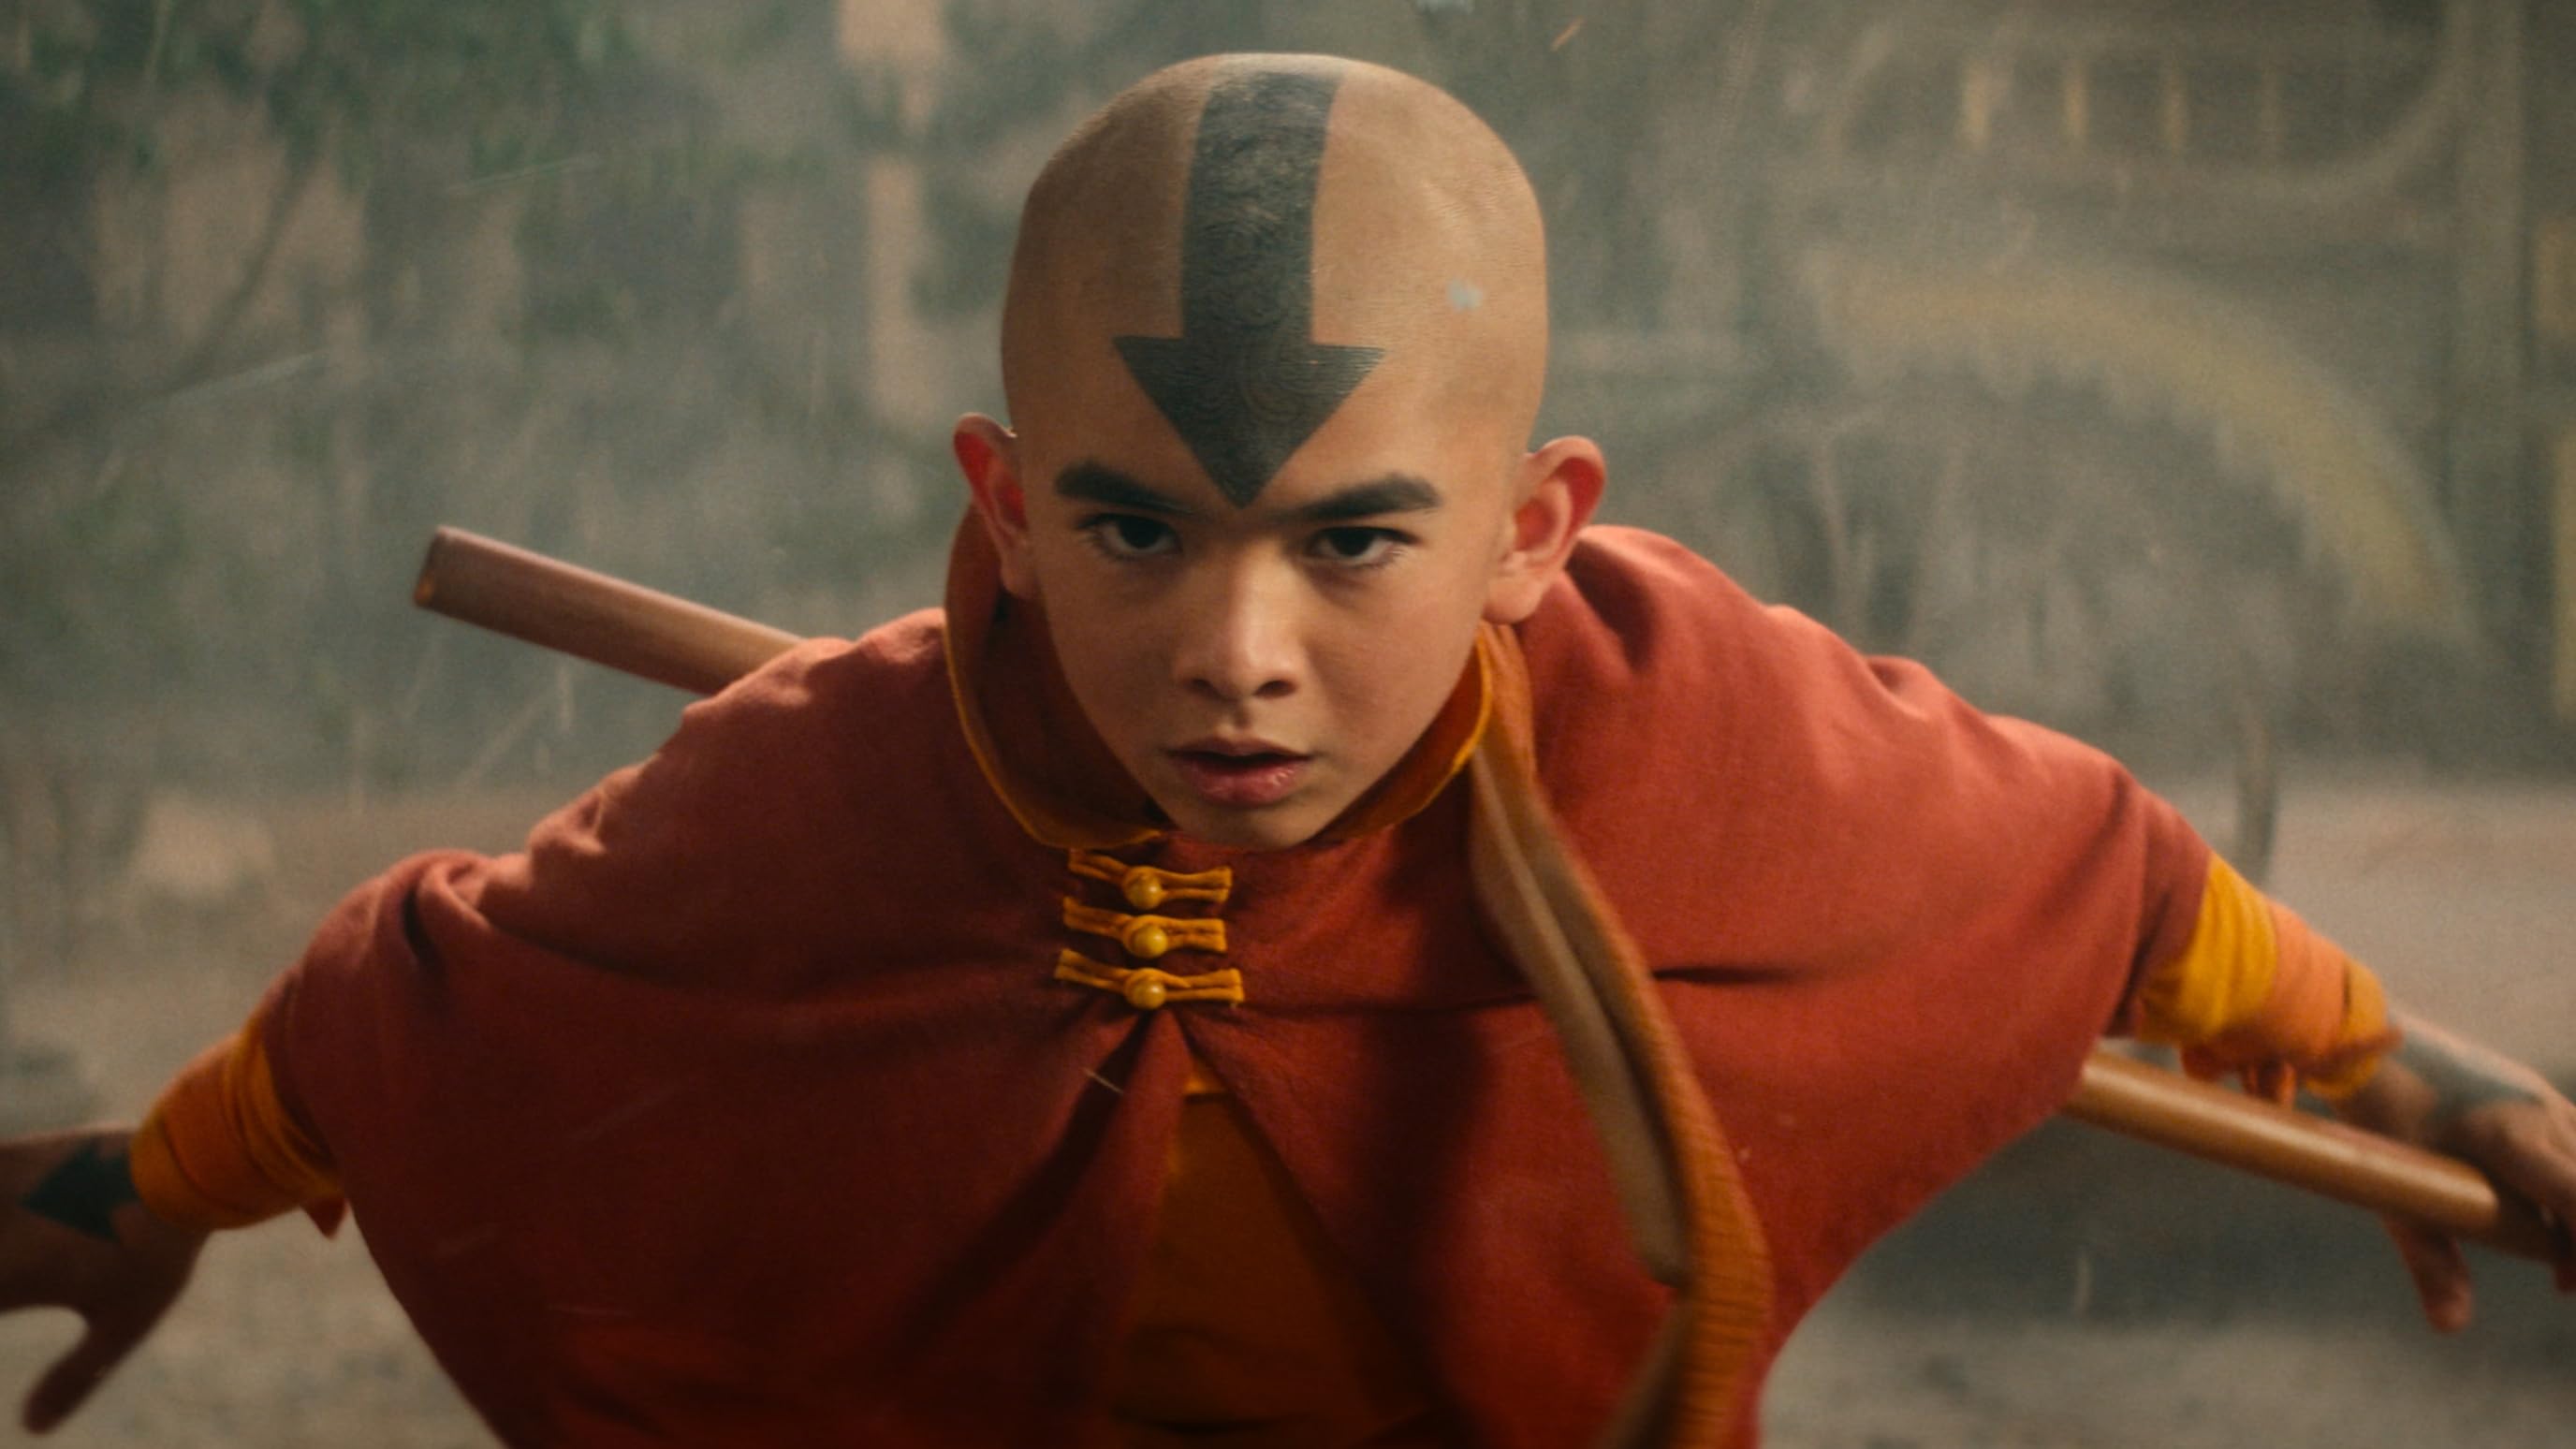 chris bolger add pictures from avatar: the last airbender photo